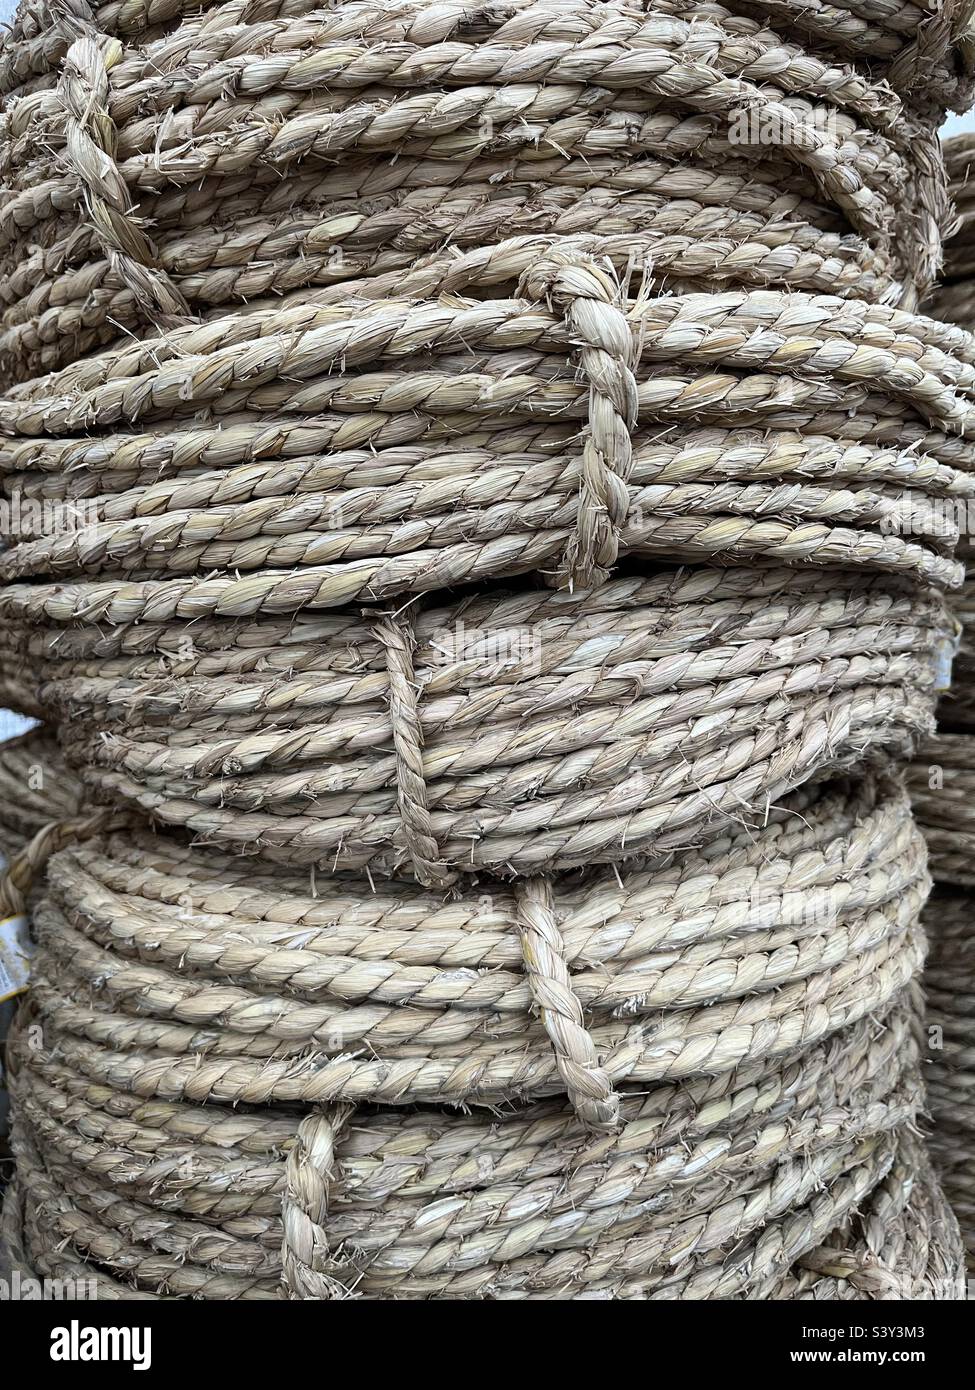 Stack of coils of brown rope made from natural fibre Stock Photo